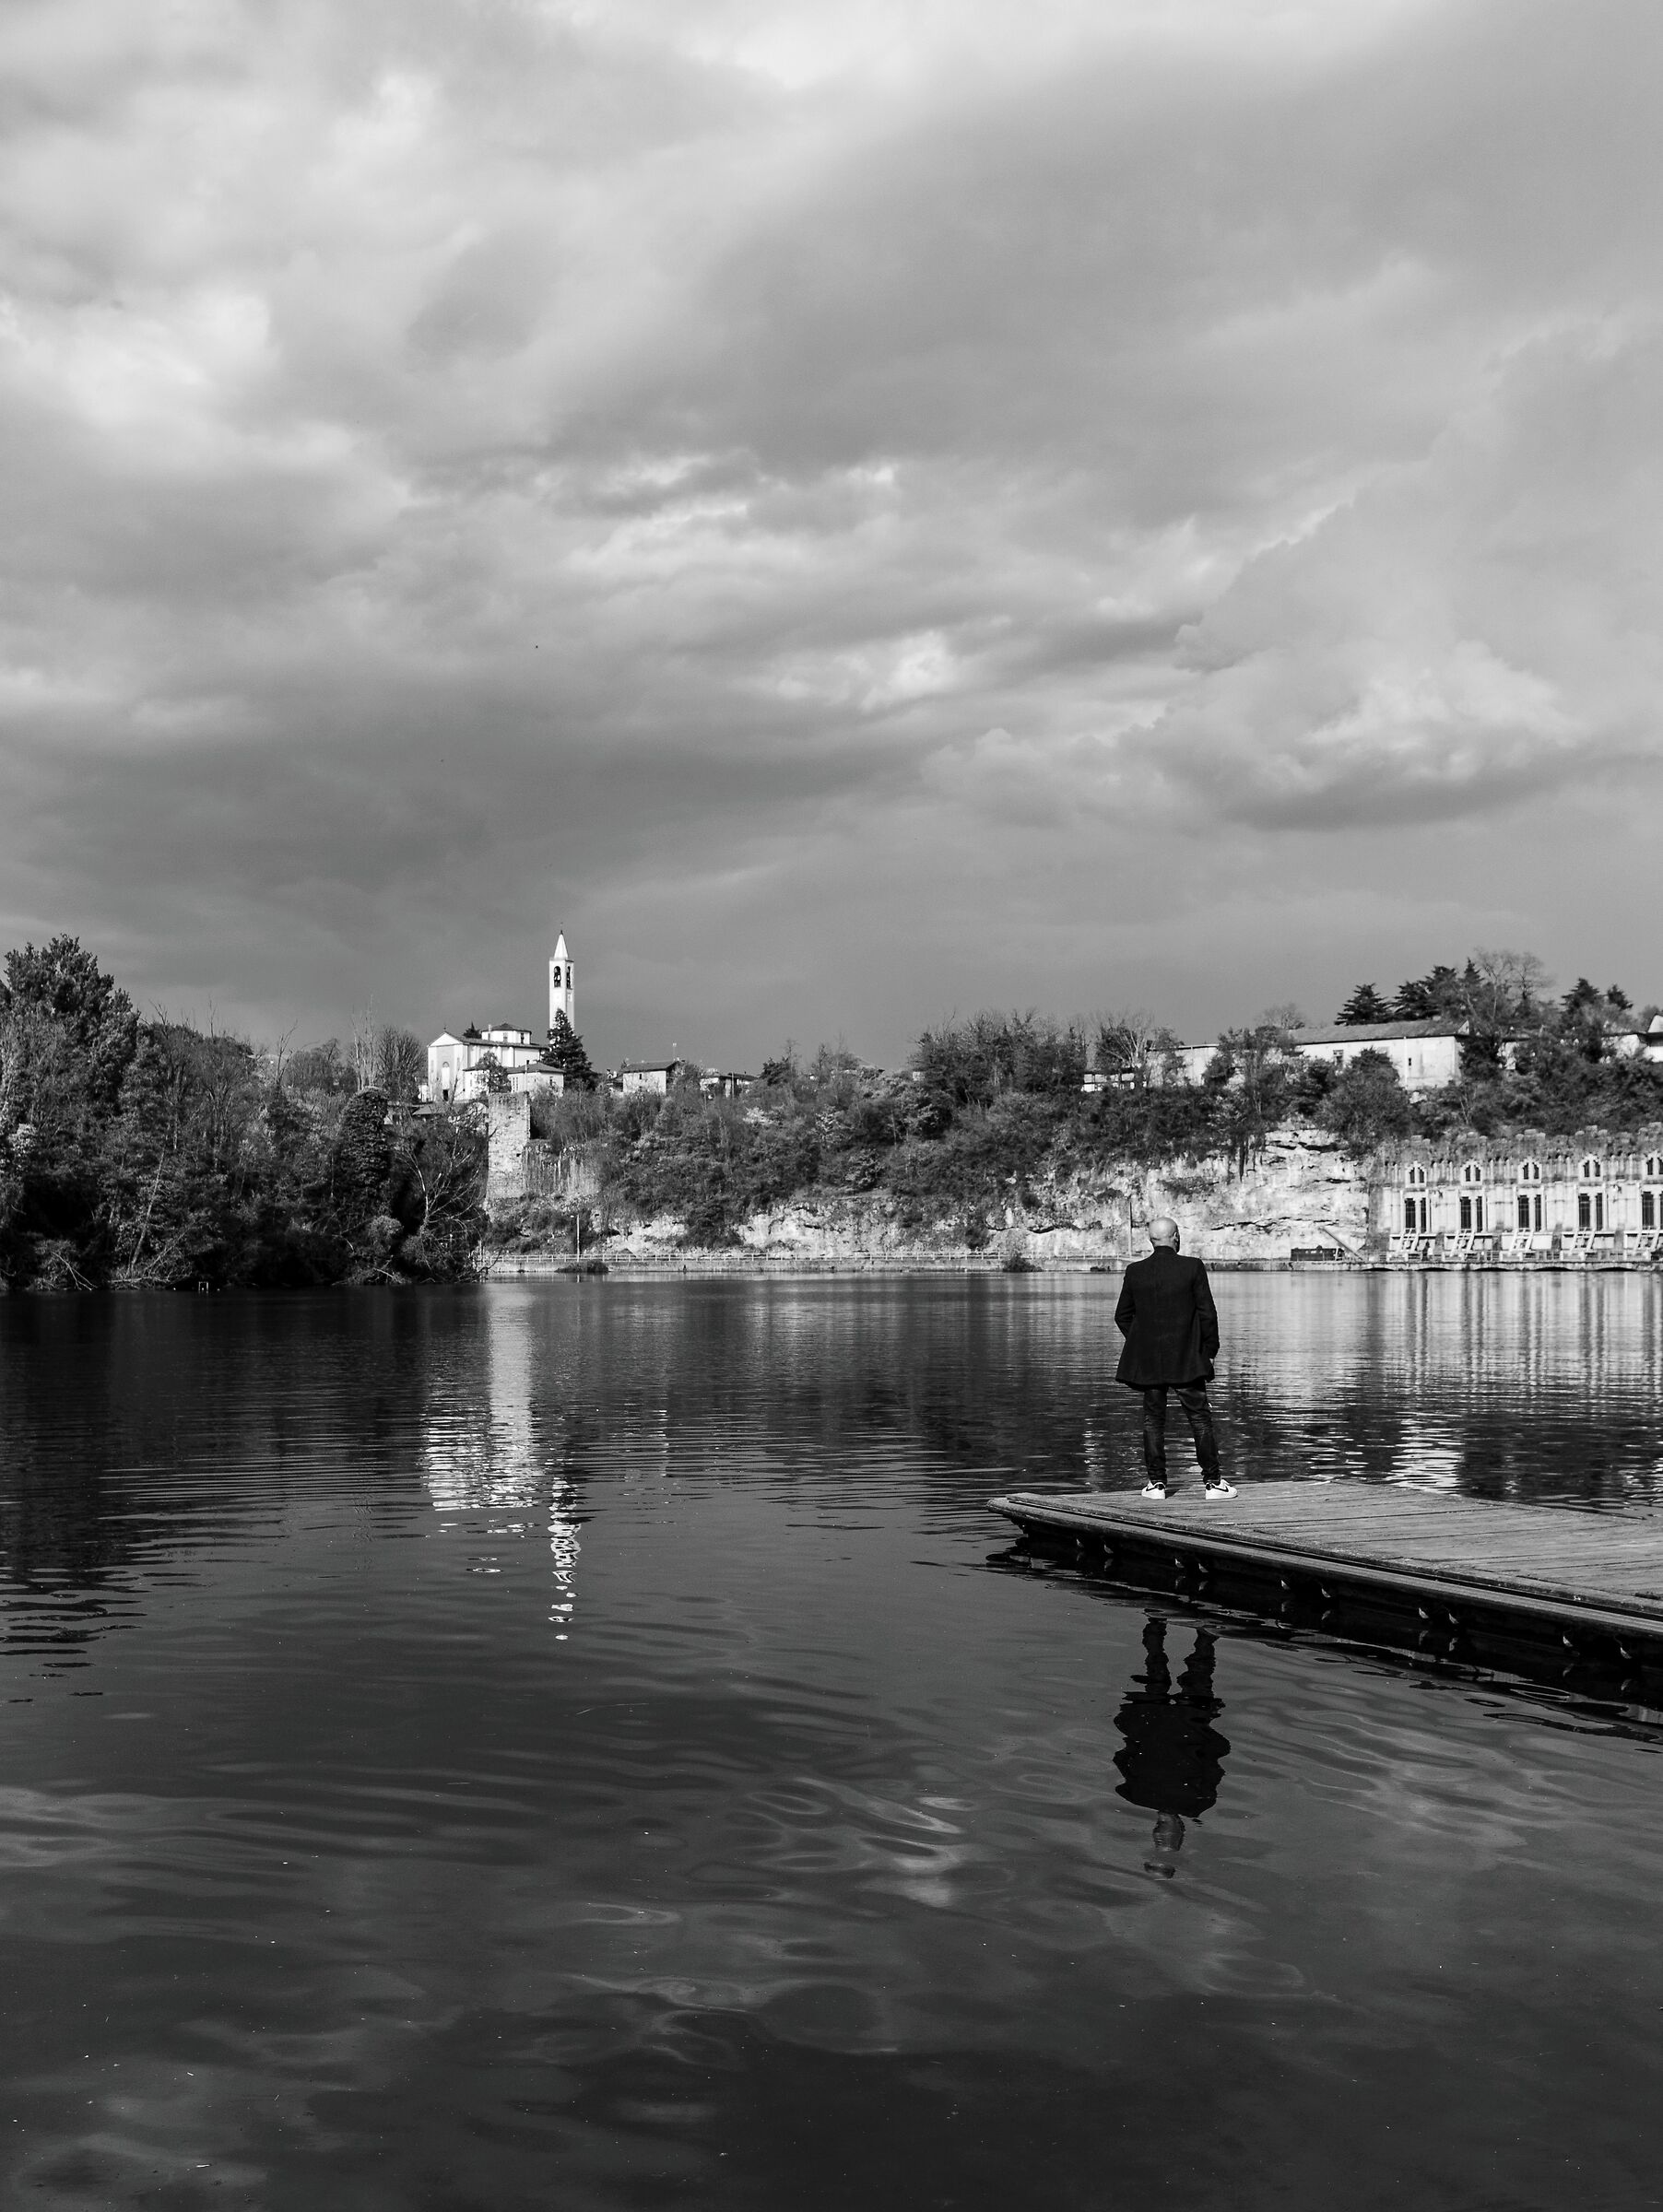 The Wanderer on the river in b / w ...